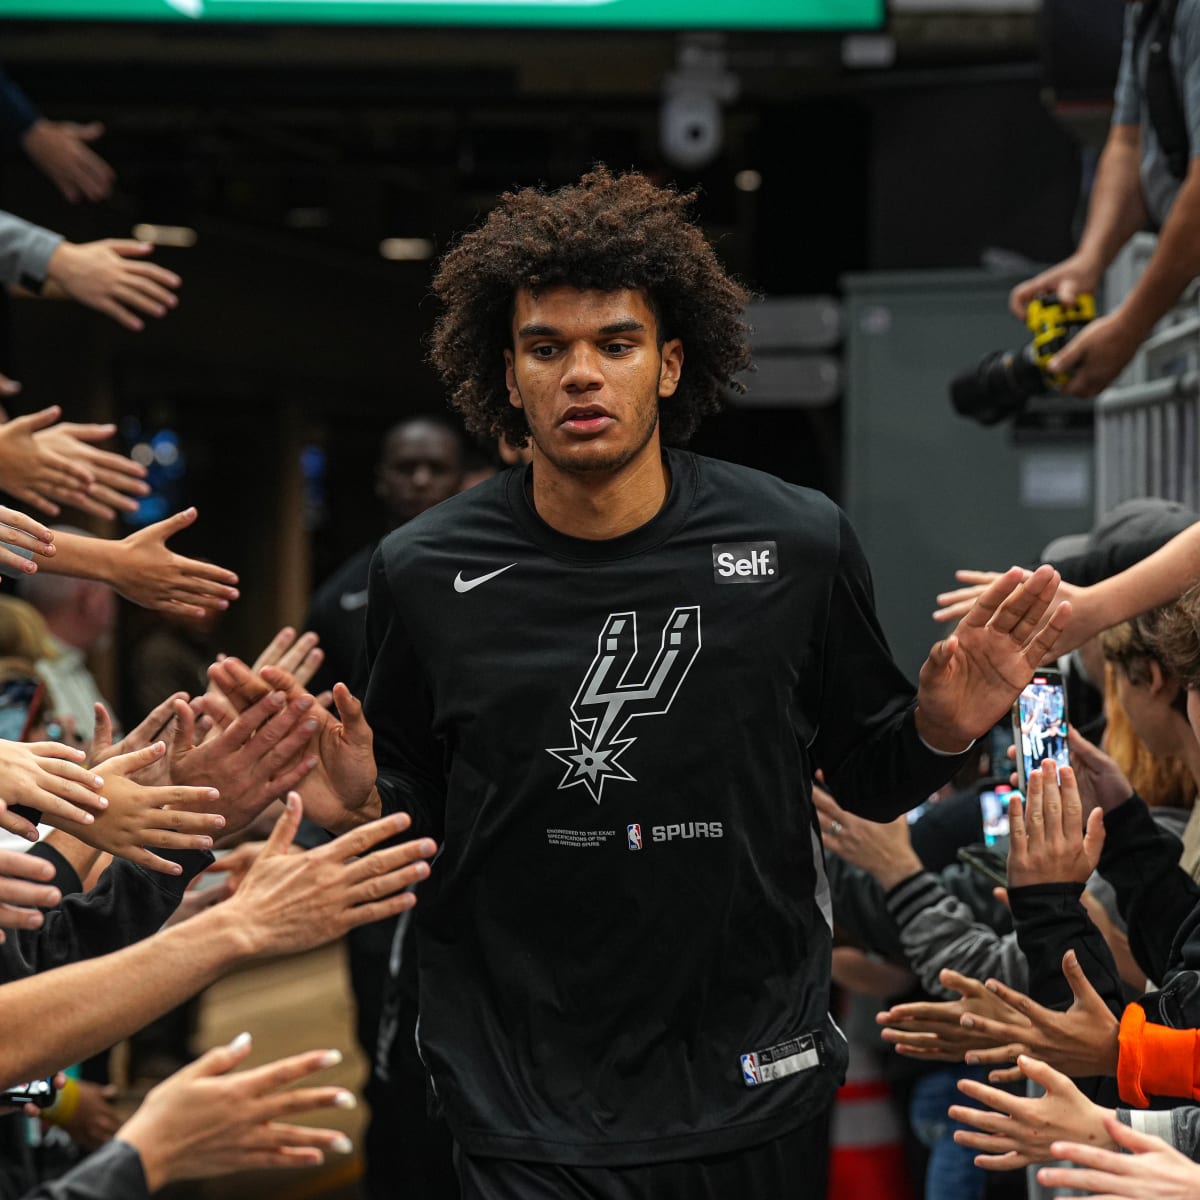 For Spurs' Dominick Barlow, confidence will be key in his